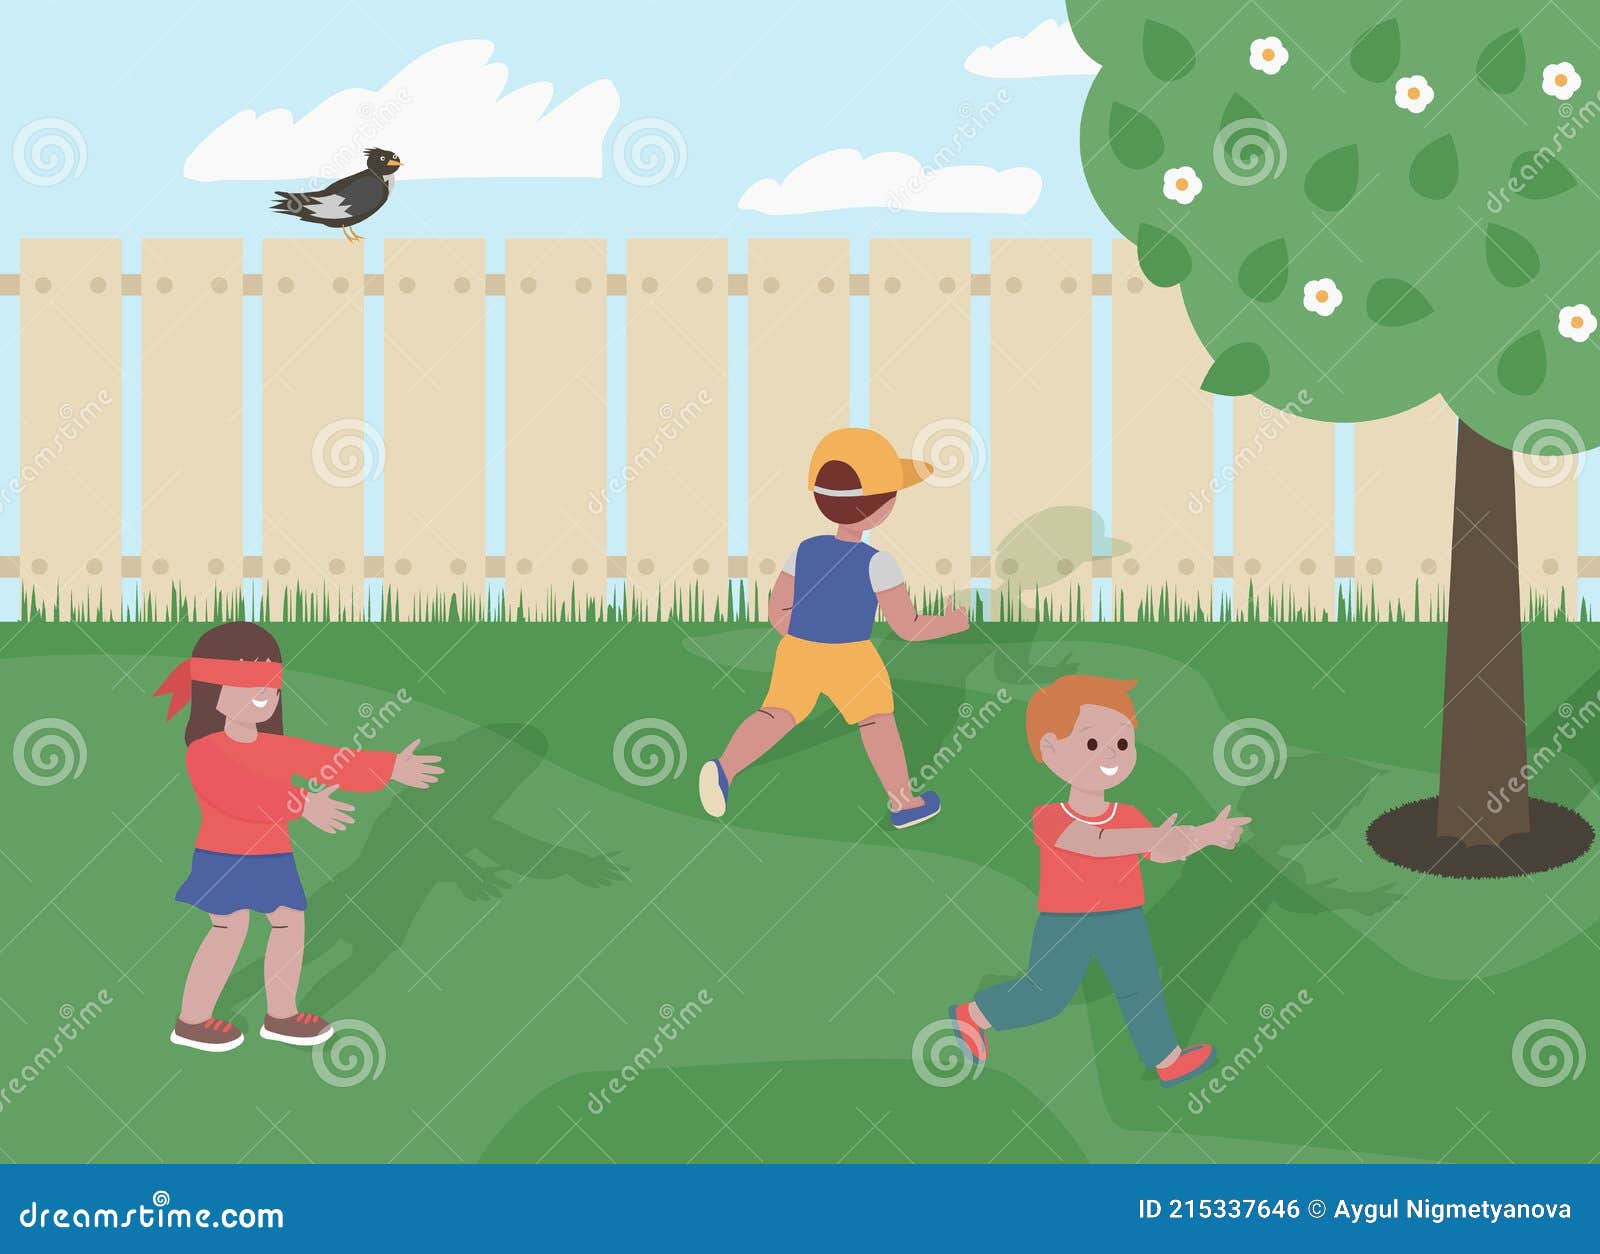 Premium Vector  Children playing hide and seek in the park